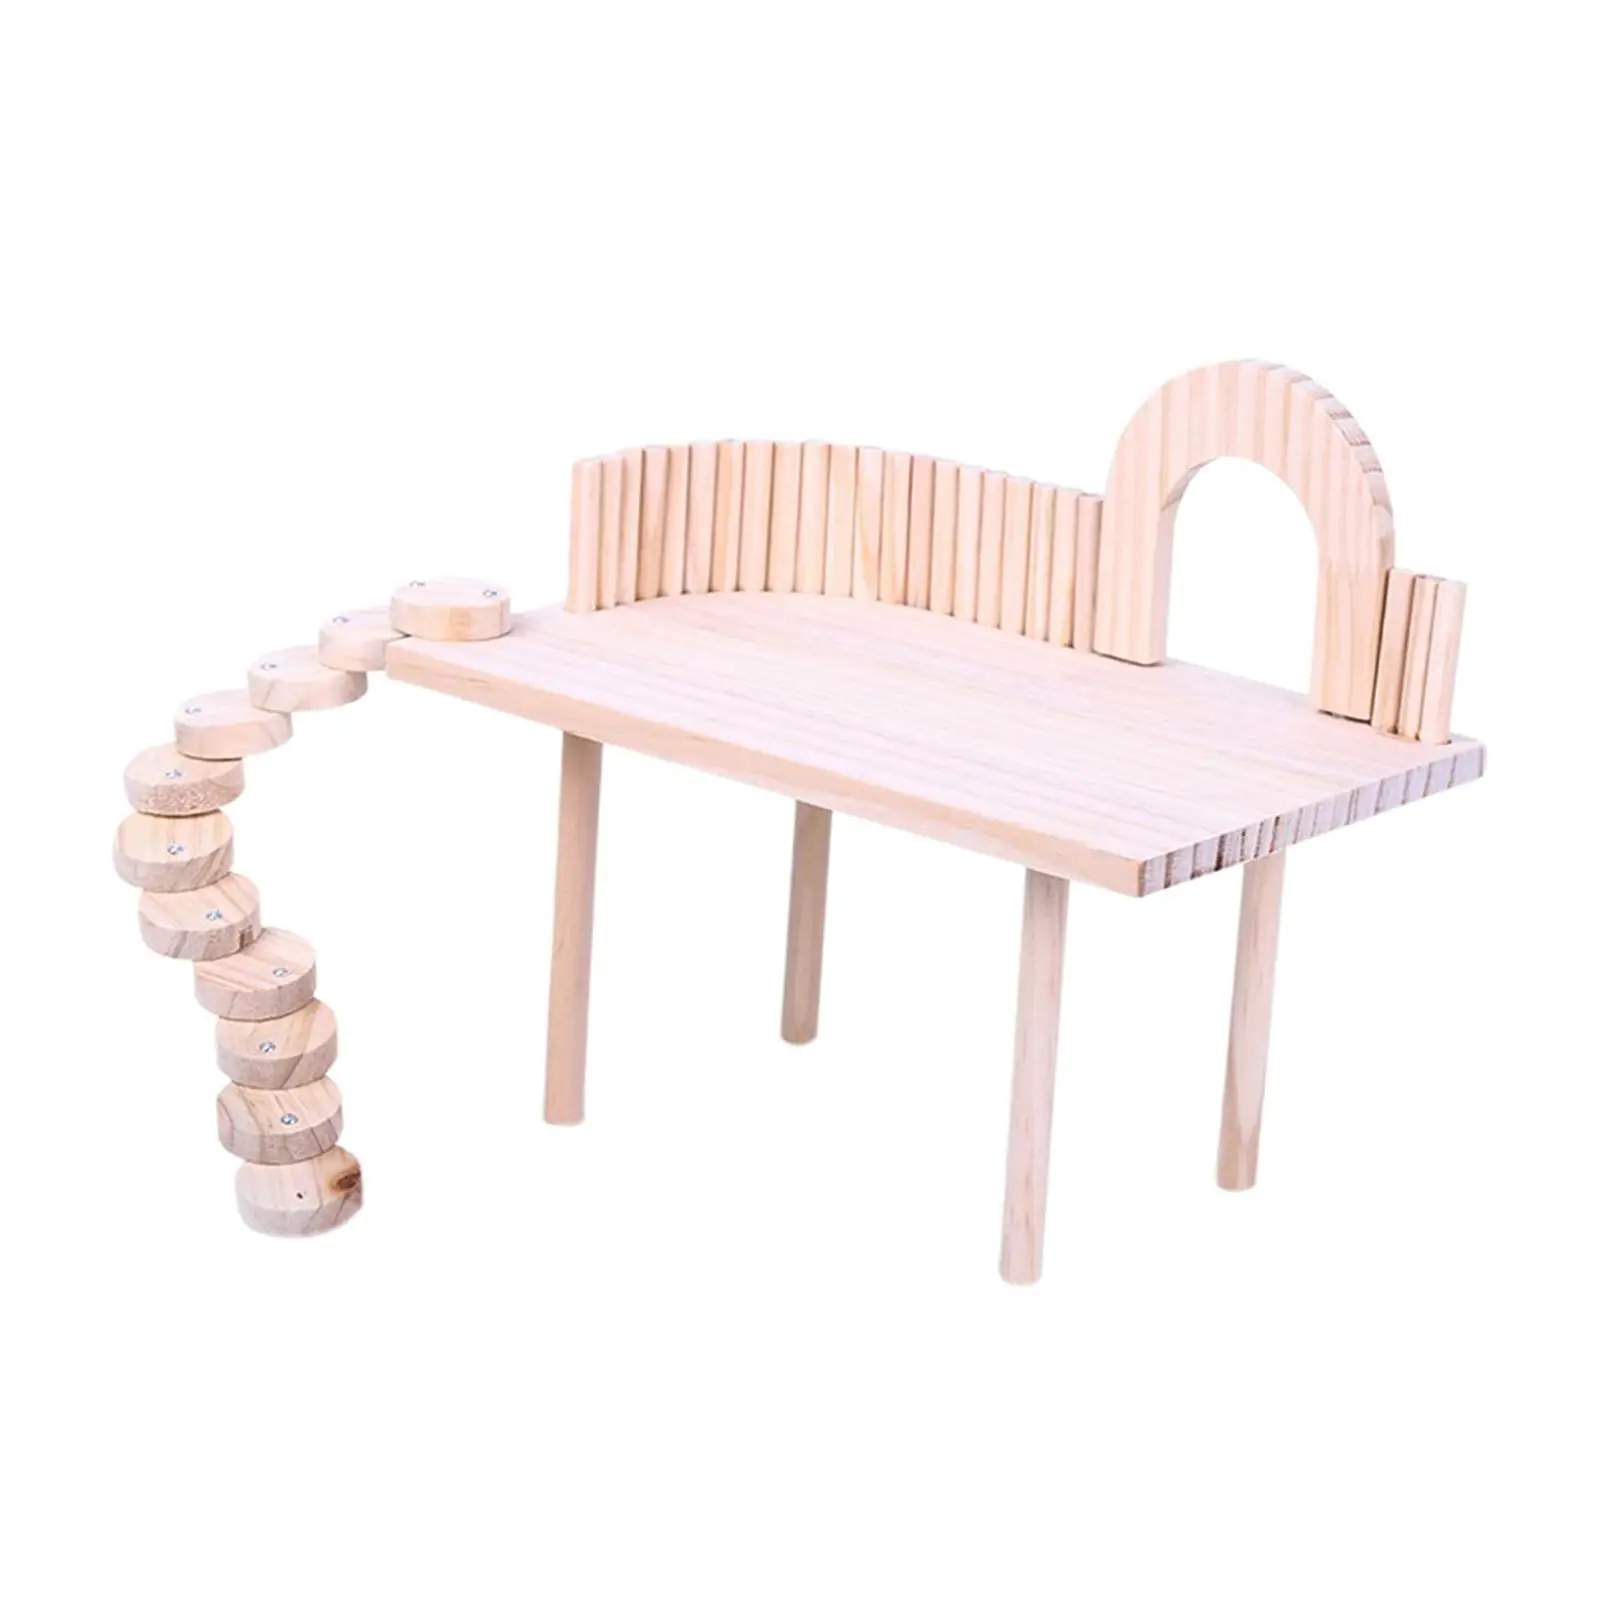 Natural Wood Platform Stand Climbing Ladder Stairs Playground Cage Accessories for Chinchilla Mouse Small Pets Chewing Exercise